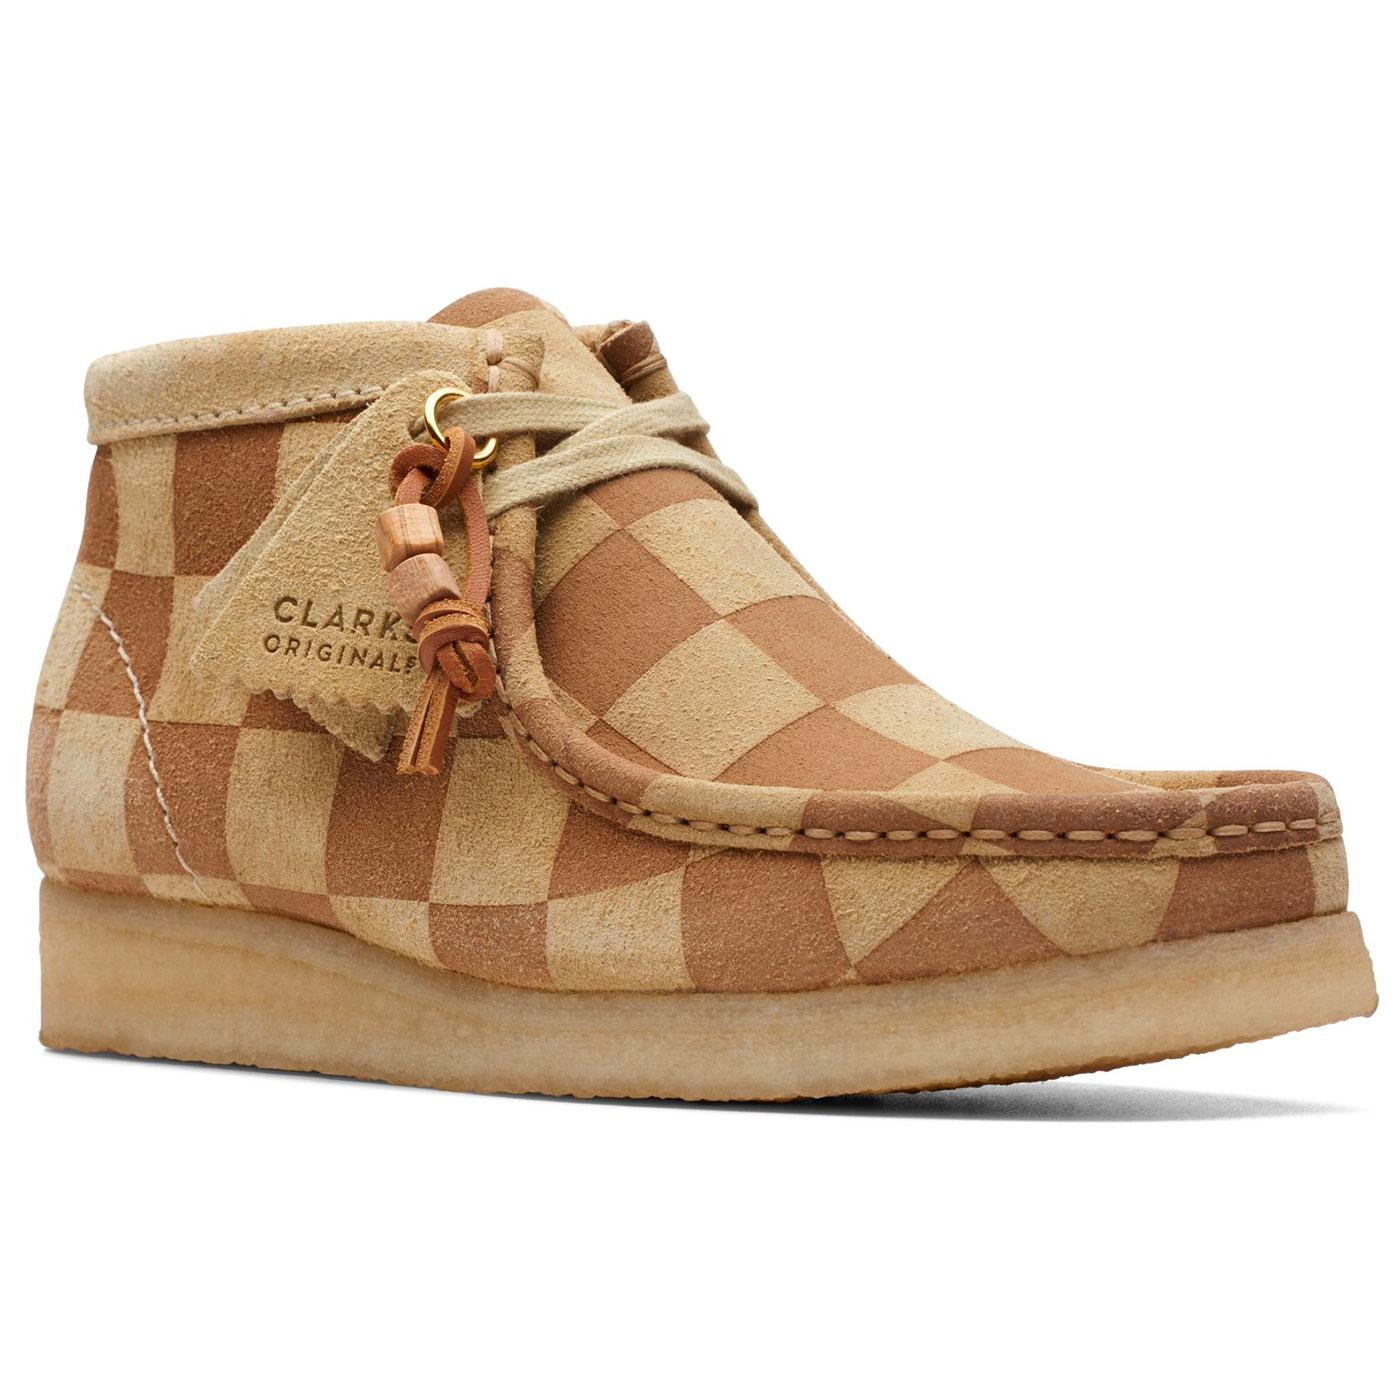 Wallabee Boot CLARKS ORIGINALS Suede Check Boots M